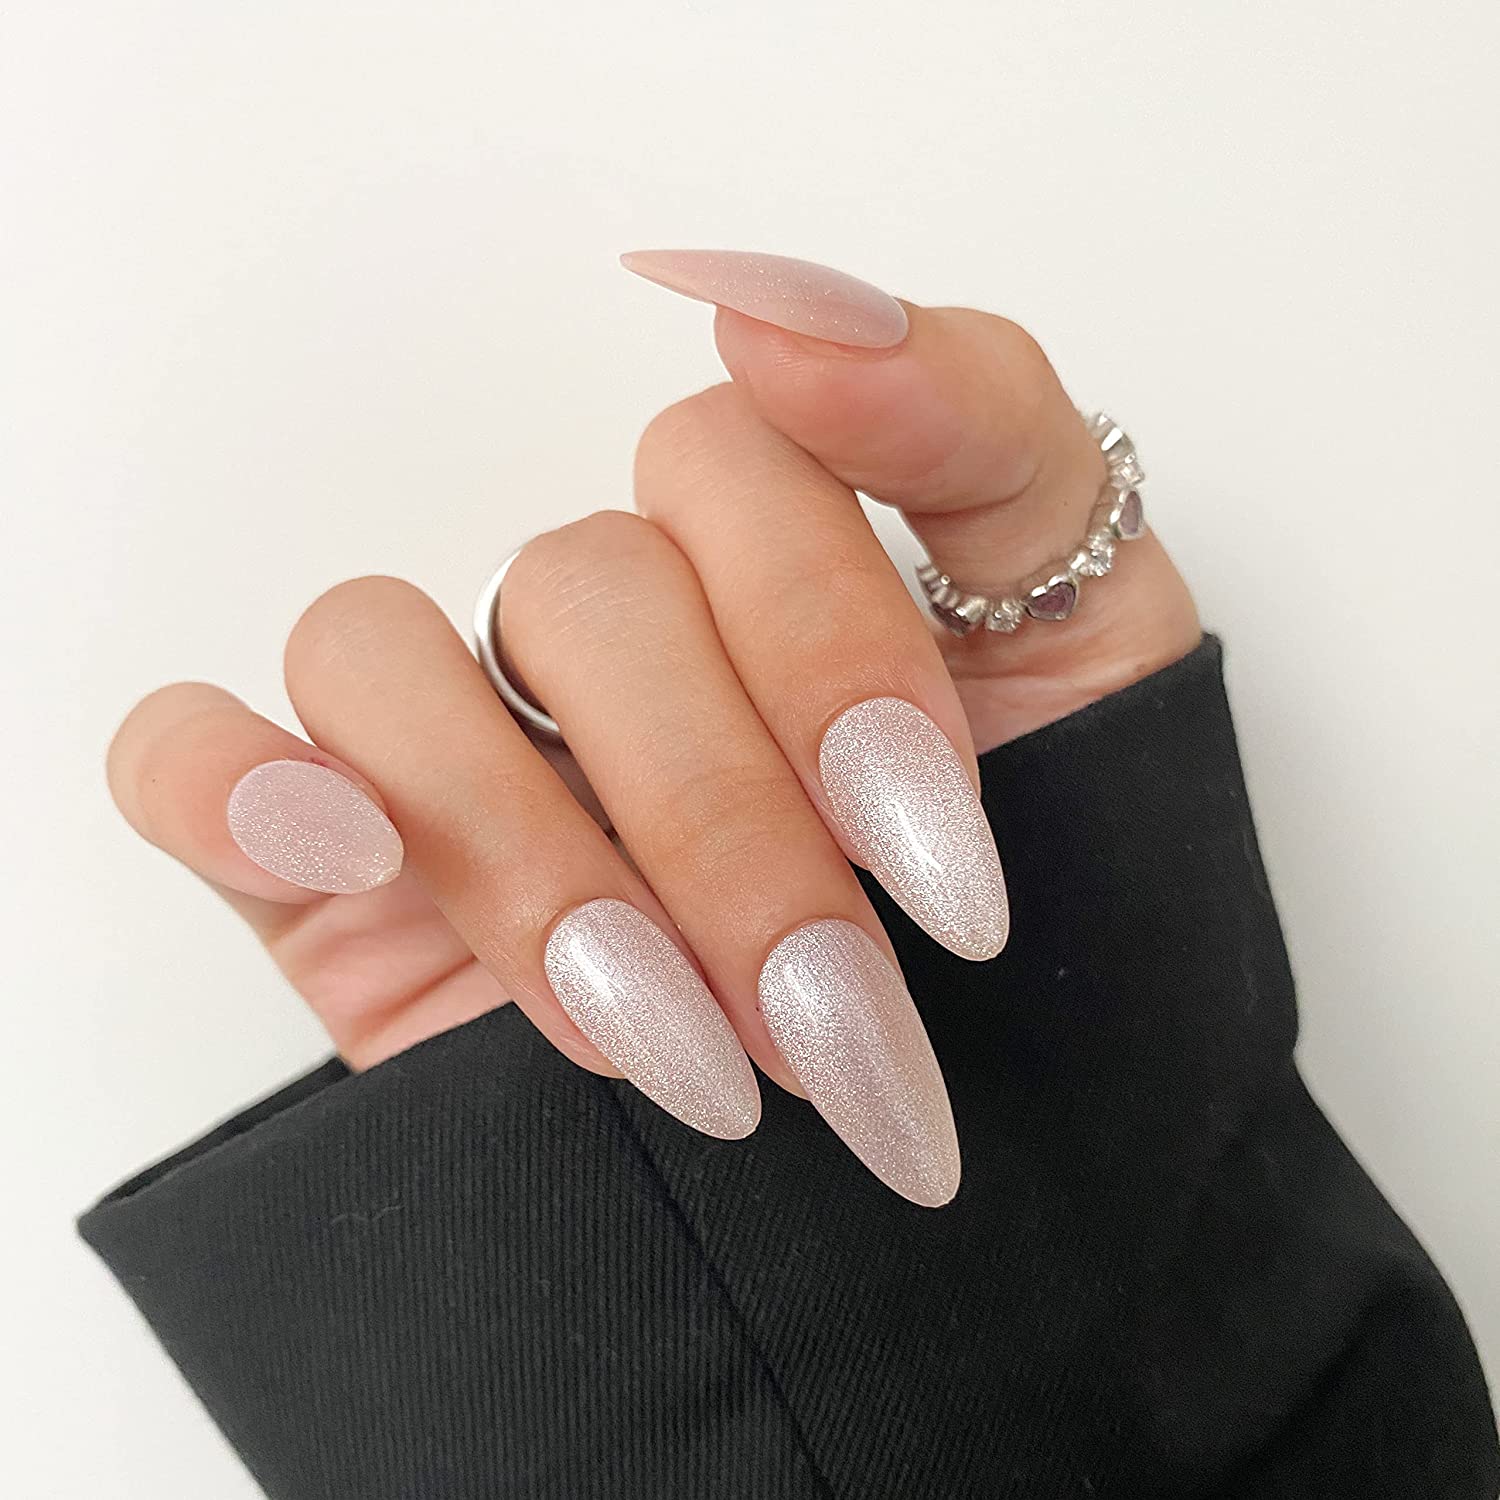 30 Best Early Spring Nails to Try | Pink tip nails, Pink acrylic nails,  Pink nails